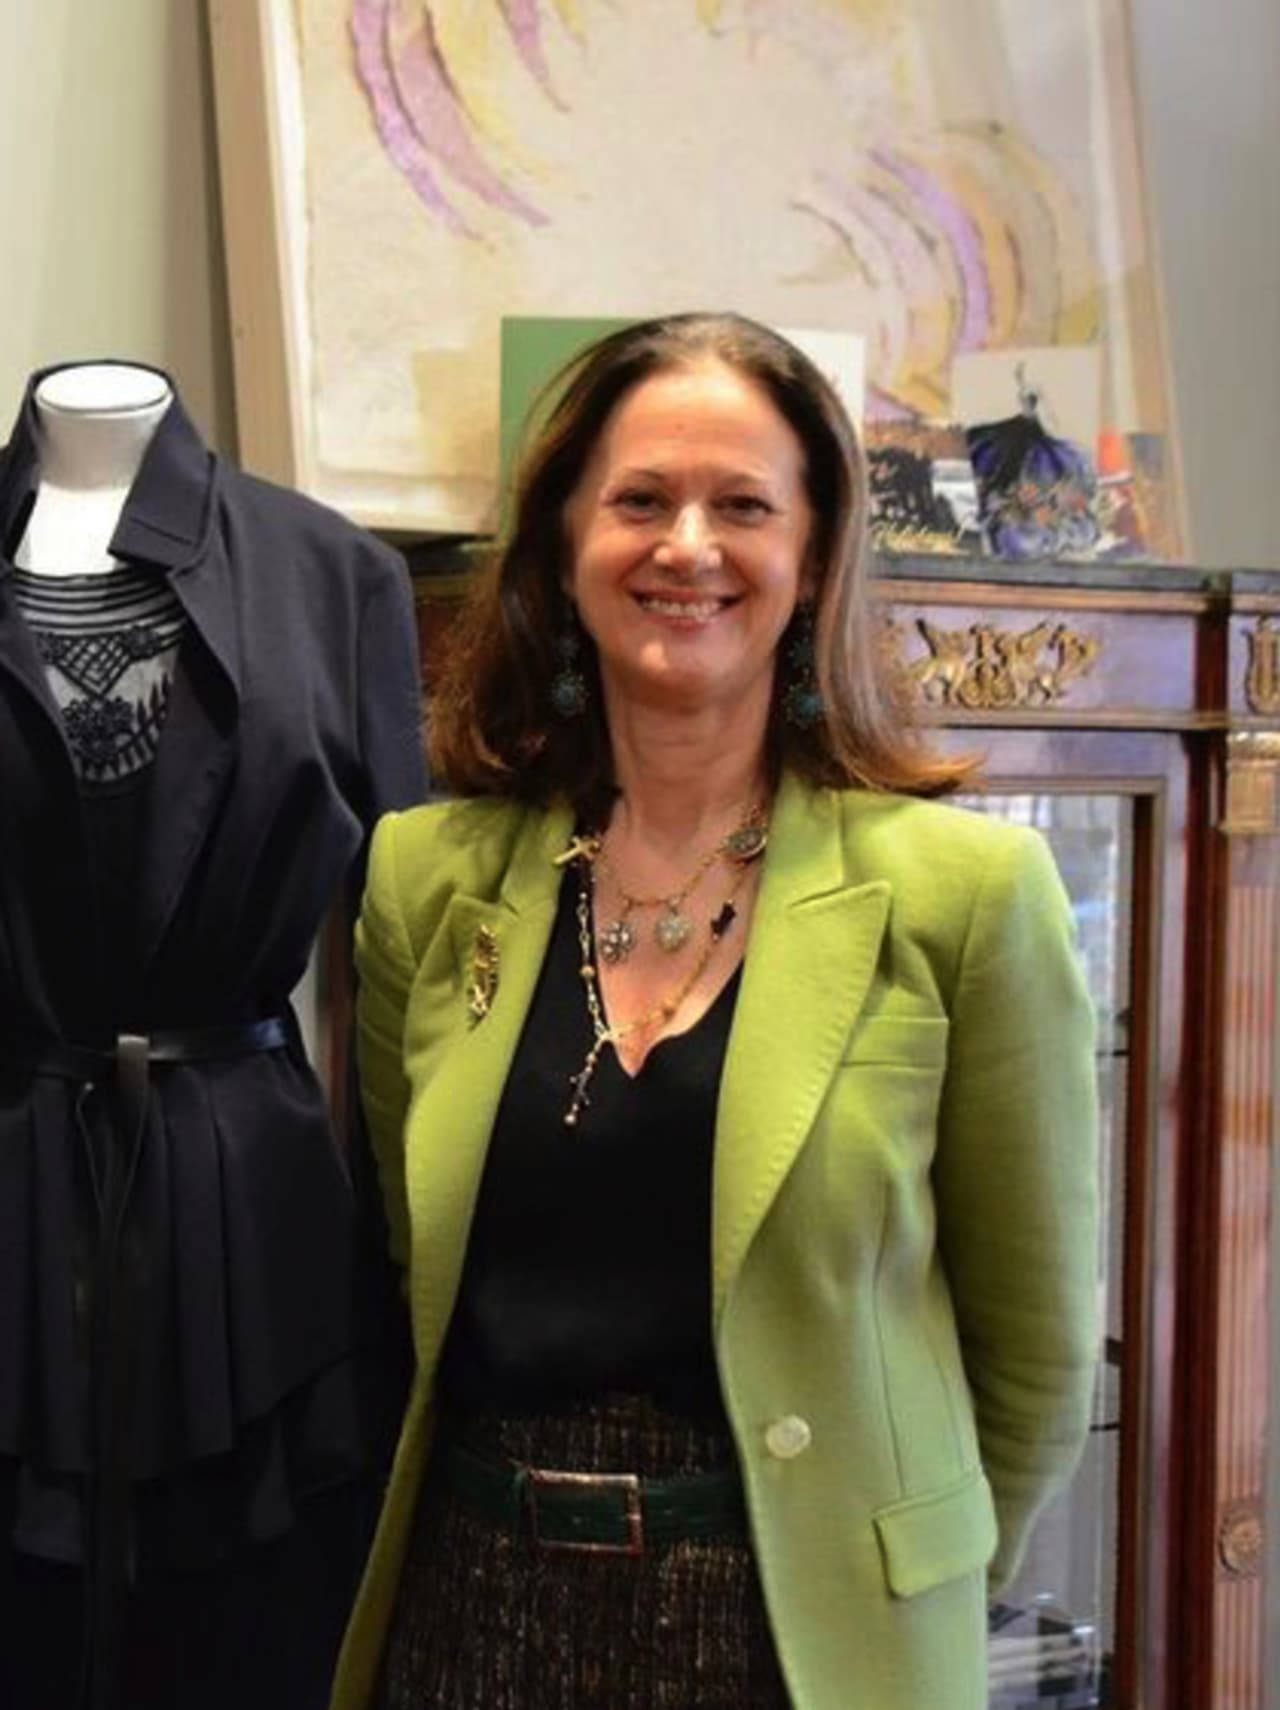 Bedford resident Diane Roth, owner of L’Armoire in New Canaan.